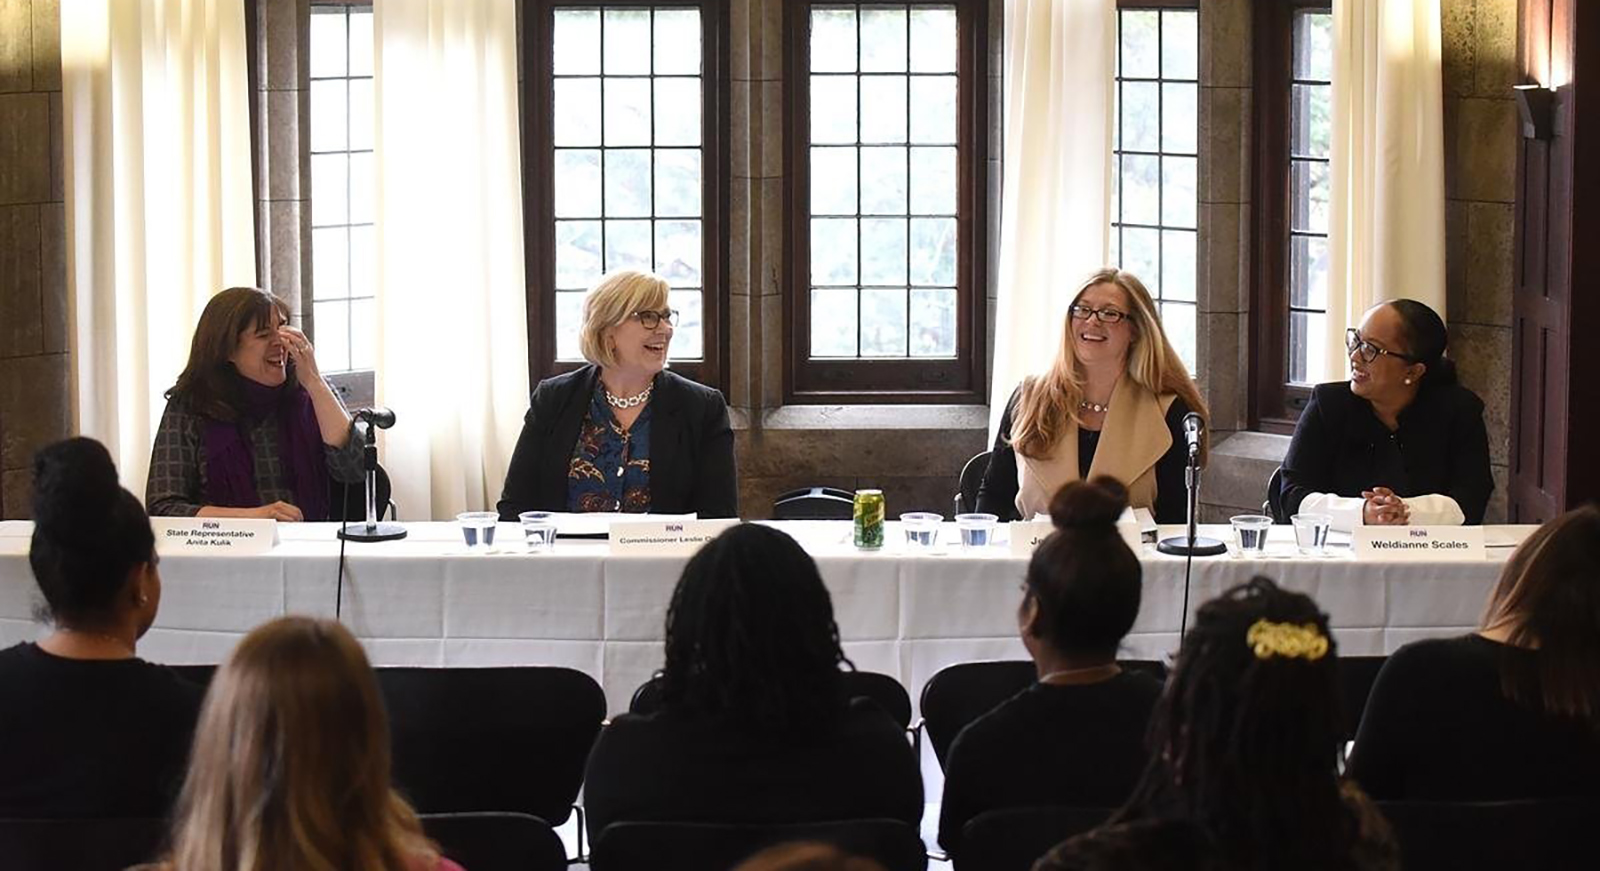 A panel of smiling and laughing women are seated at a PCWP event